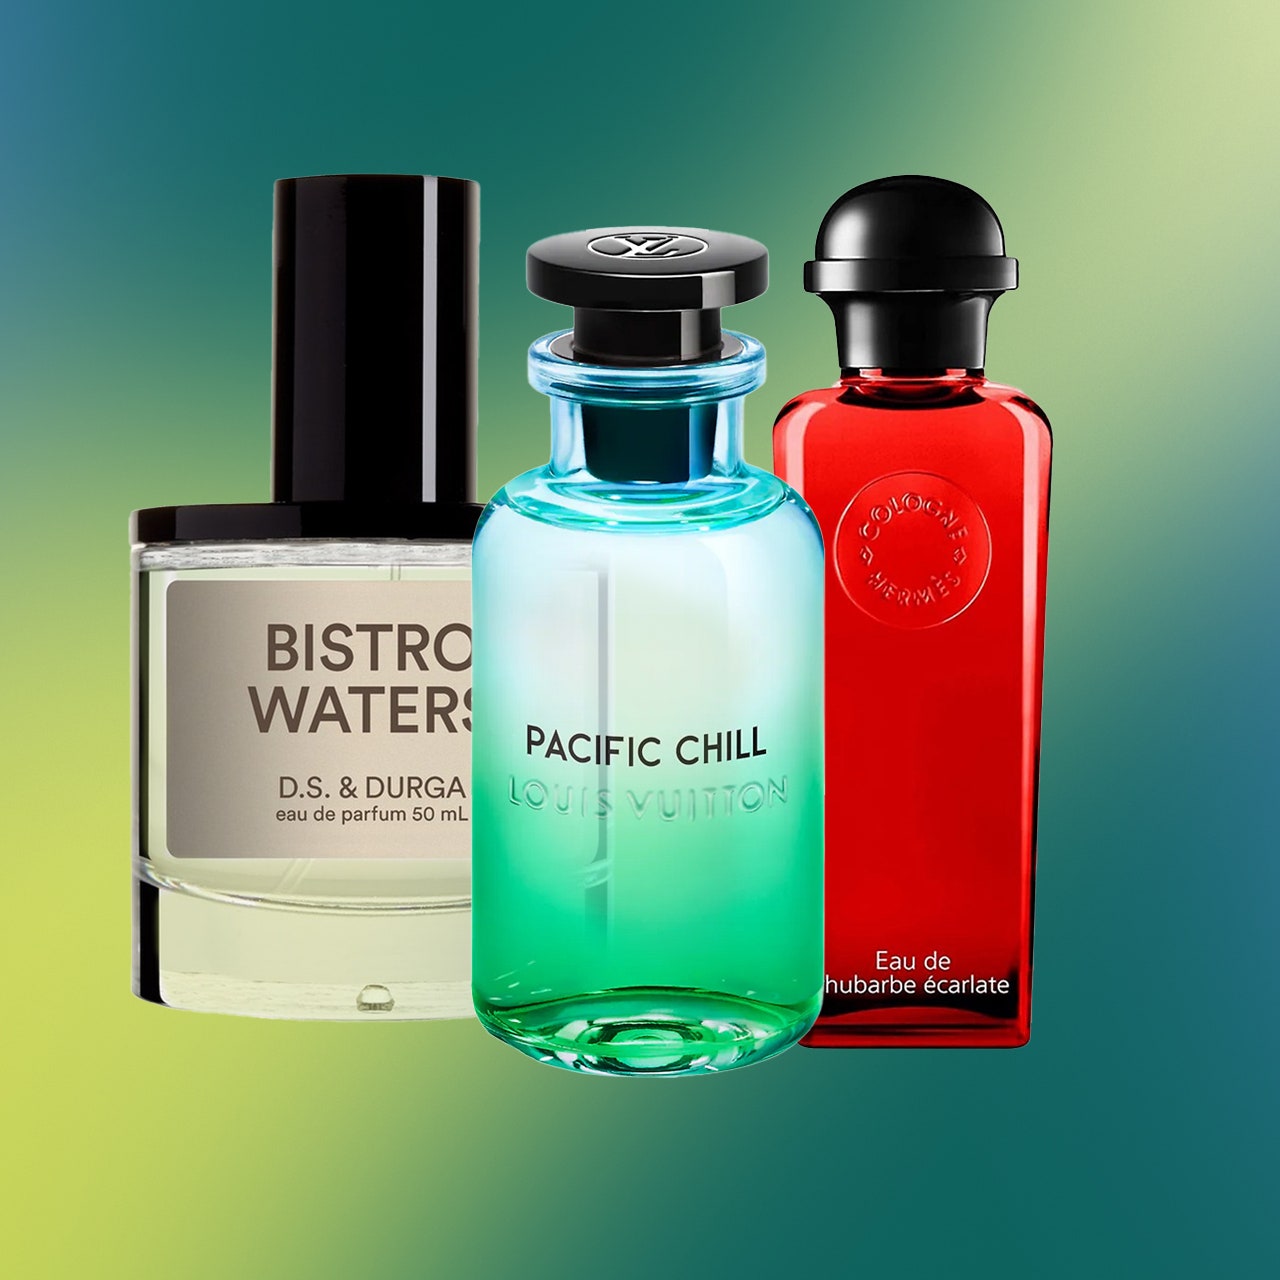 Perfumes with vegetable scents are trending, so do we all want to smell like carrots now?